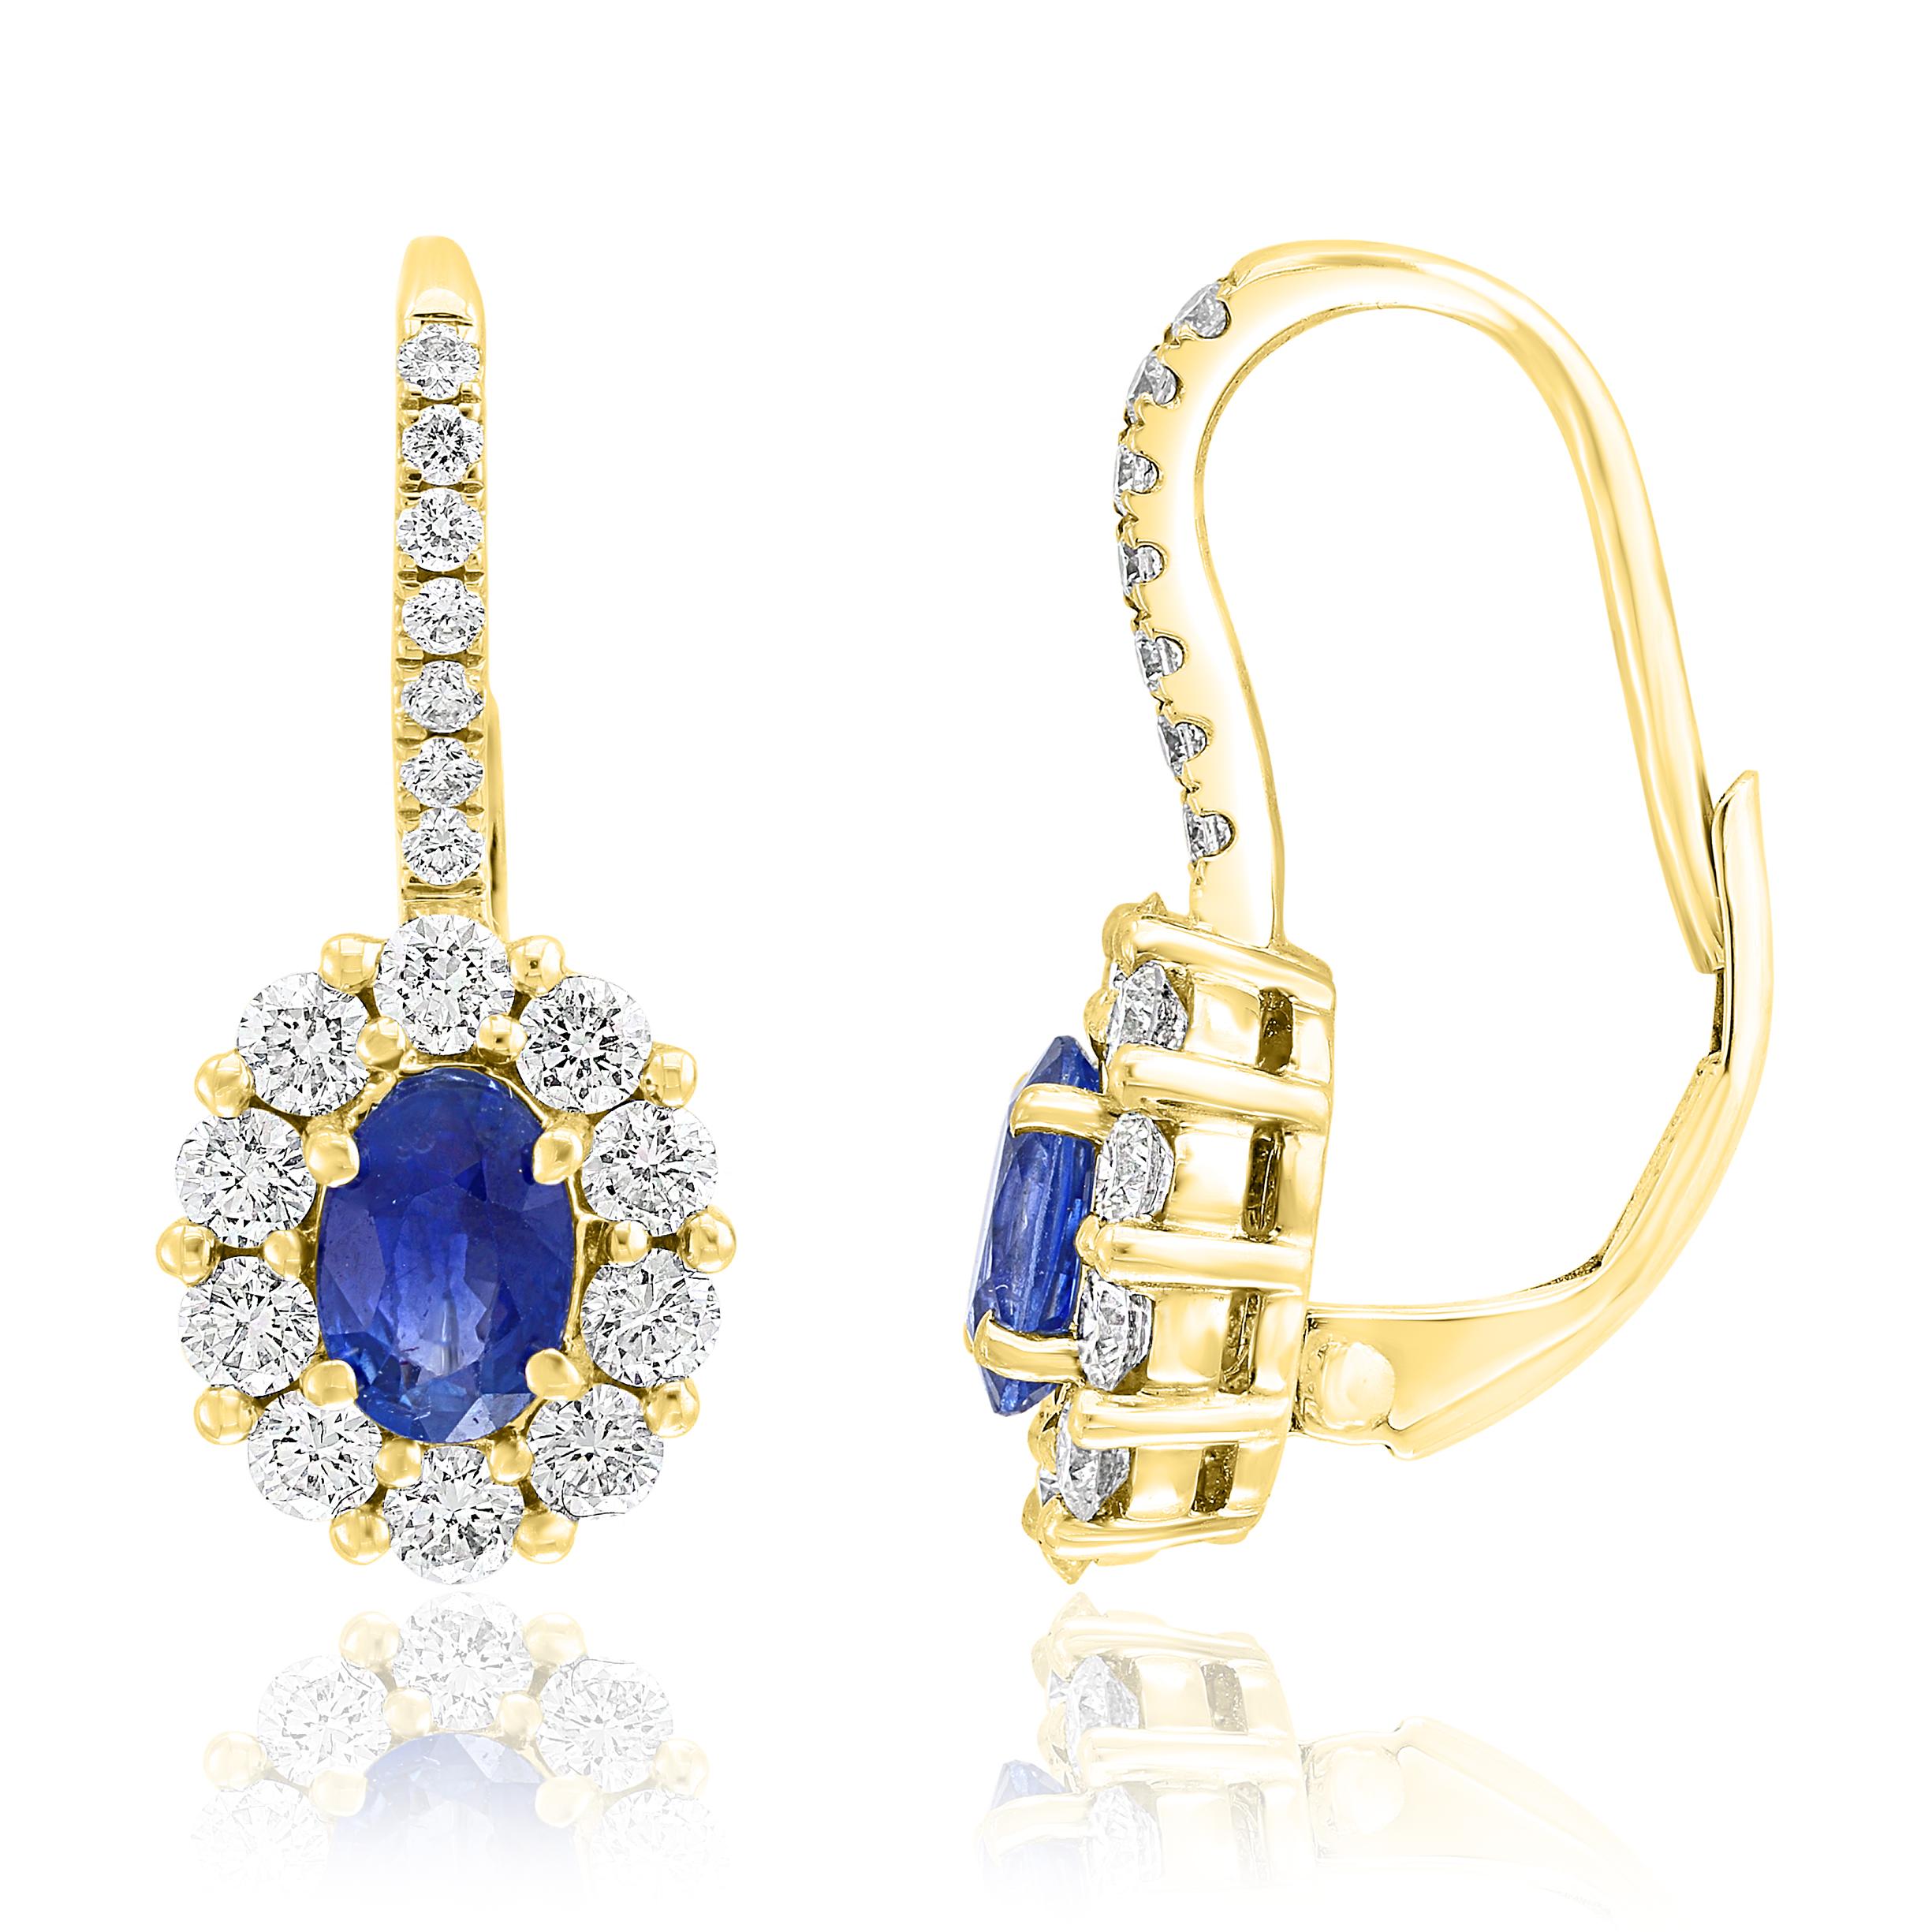 0.88 Carat Oval Cut Blue Sapphire and Diamond Earrings in 18K Yellow Gold For Sale